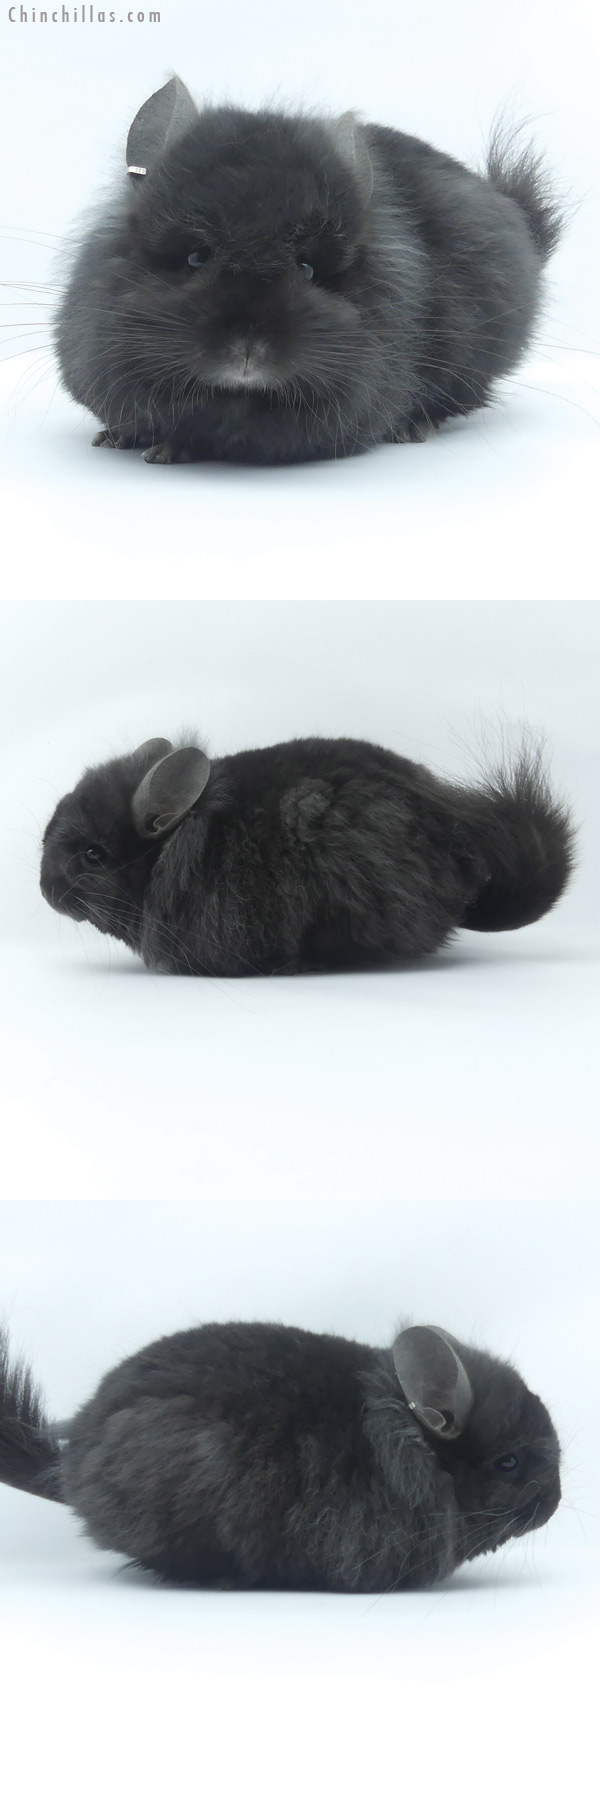 Chinchilla or related item offered for sale or export on Chinchillas.com - 19461 Exceptional Ebony ( Locken Carrier ) Royal Persian Angora Male Chinchilla